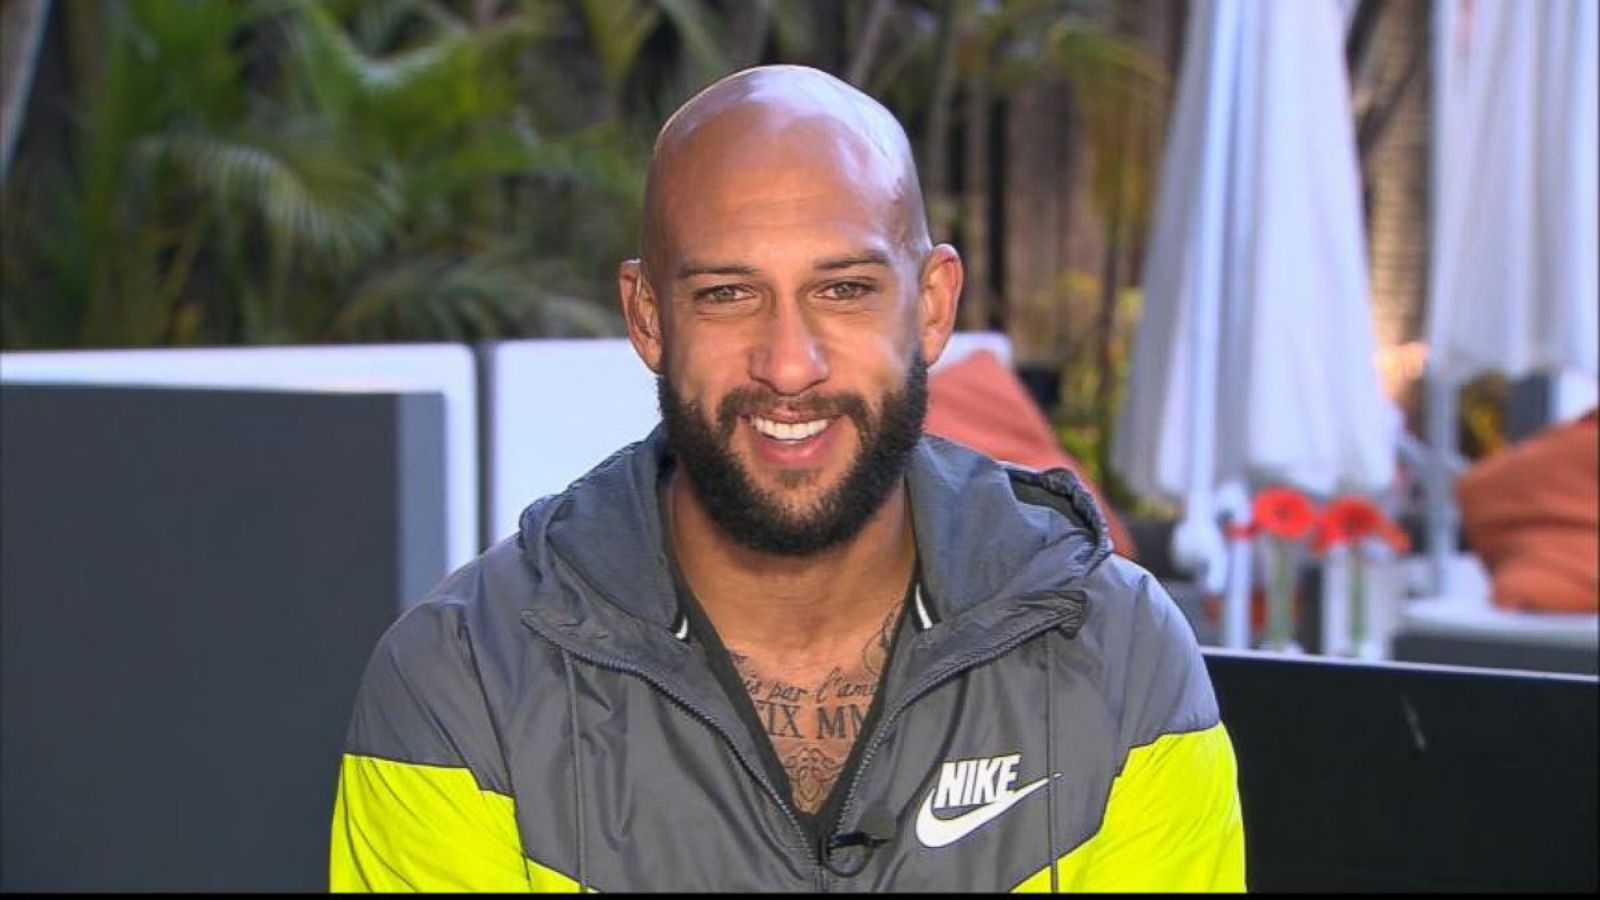 Tim Howard likely to miss US qualifiers - The San Diego Union-Tribune